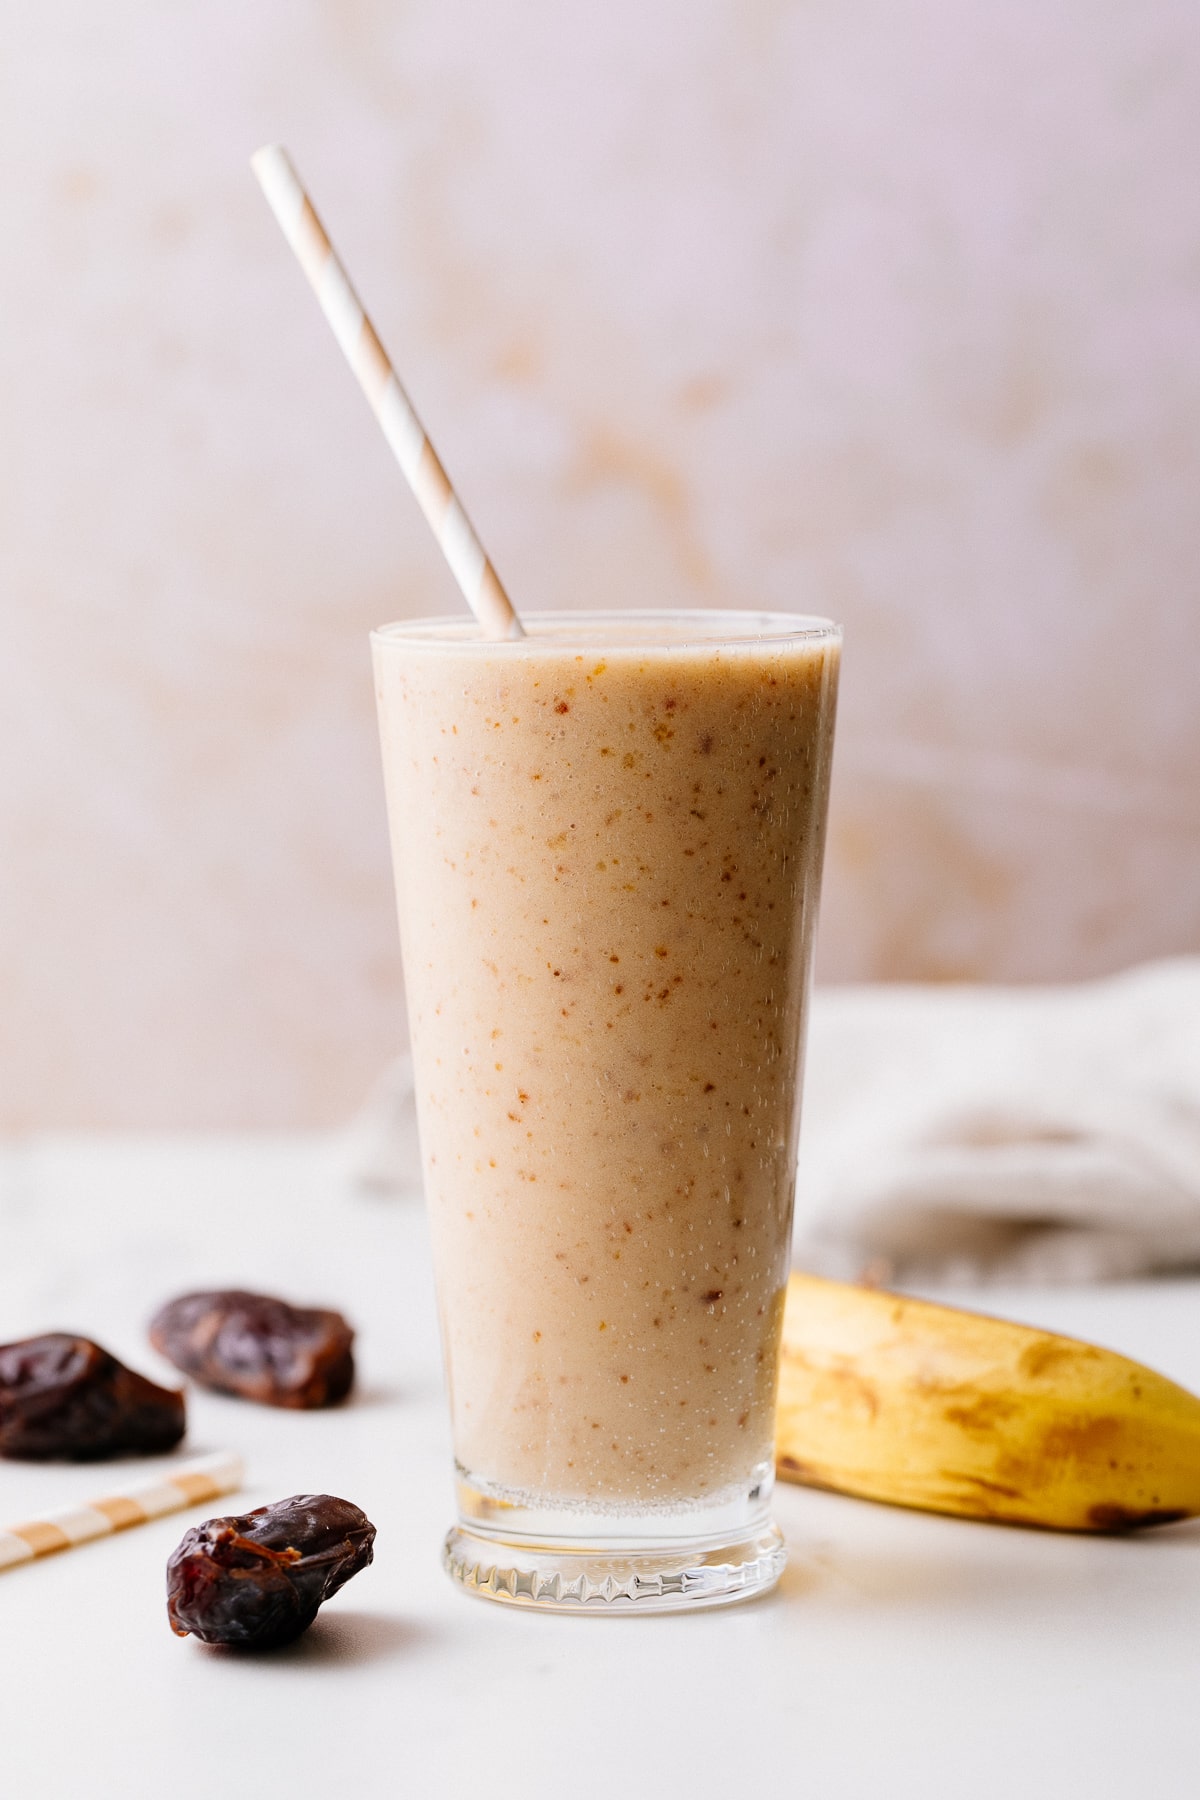 head on view of healthy vanilla date smoothie in a glass with straw.